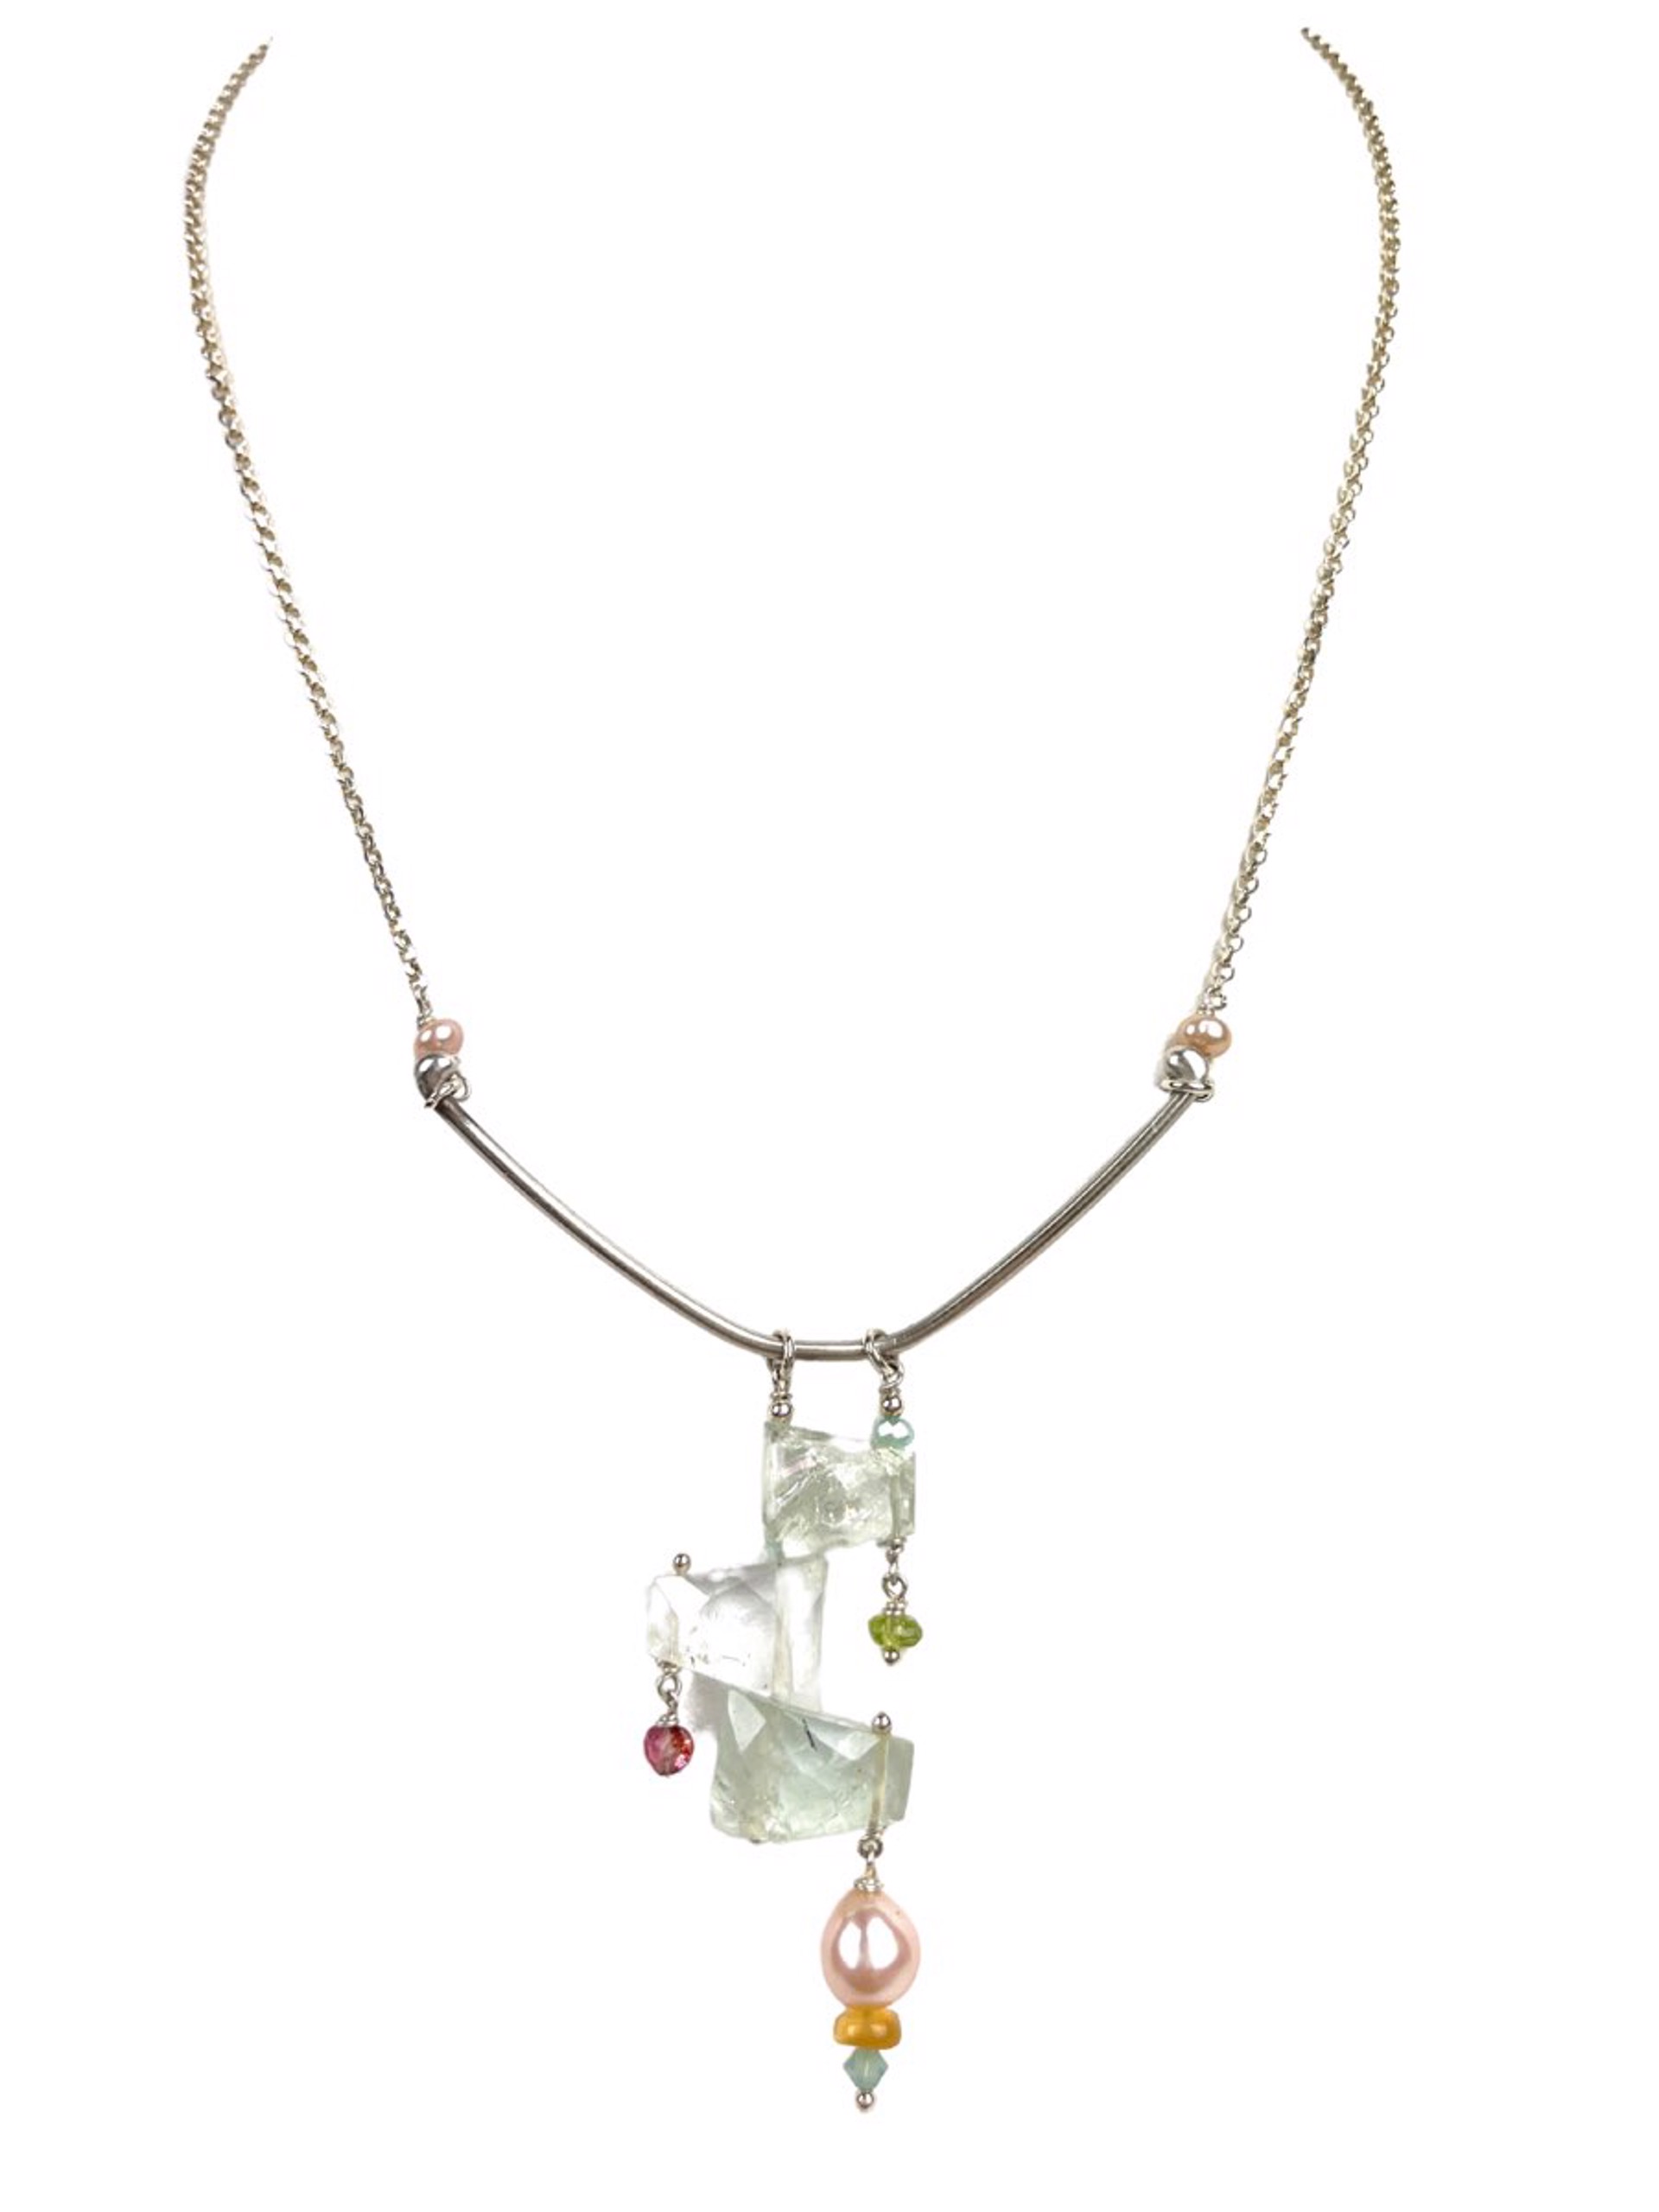 Aquamarine, Pearl and Tourmaline Necklace by Nola Smodic